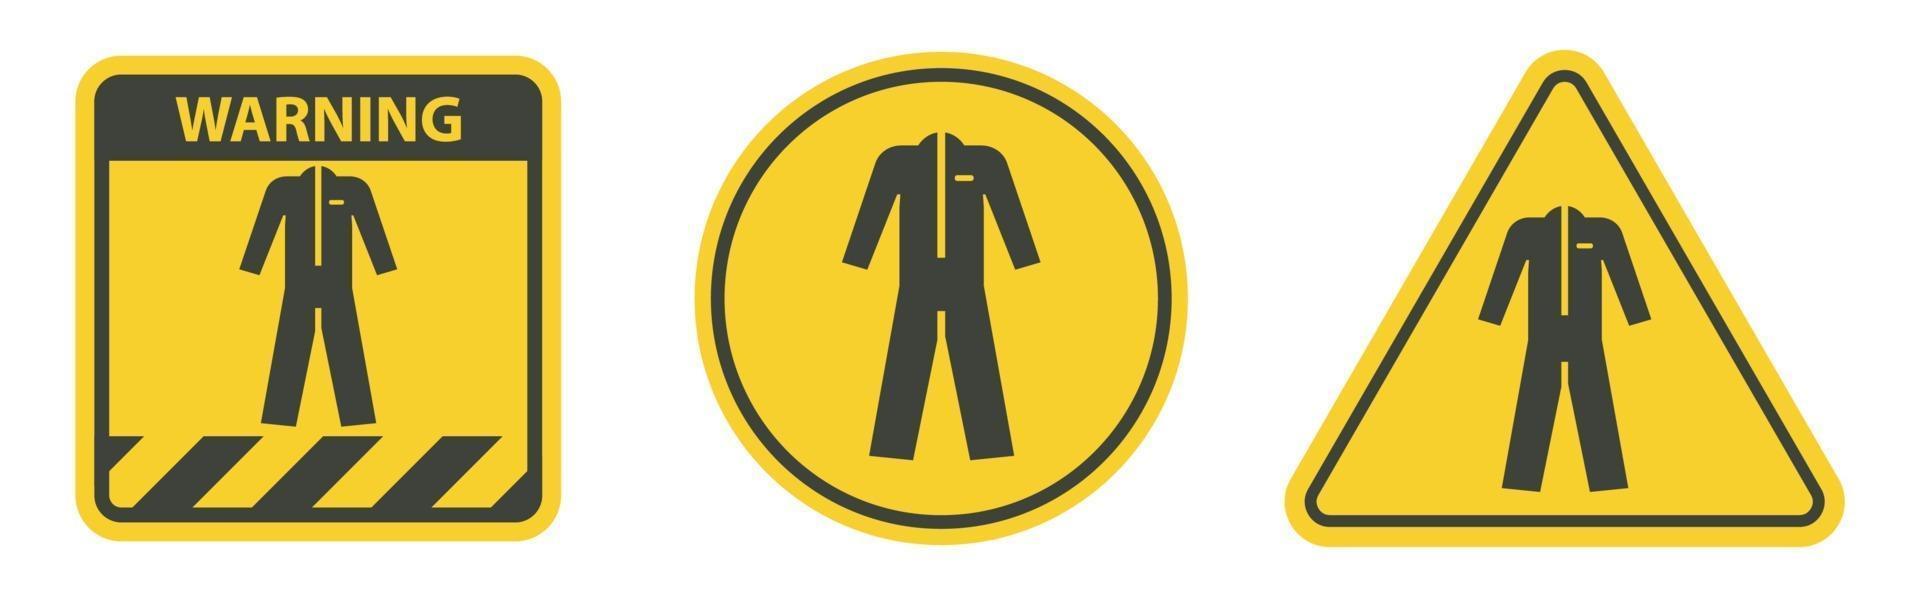 Caution Wear protective clothing sign on white background vector